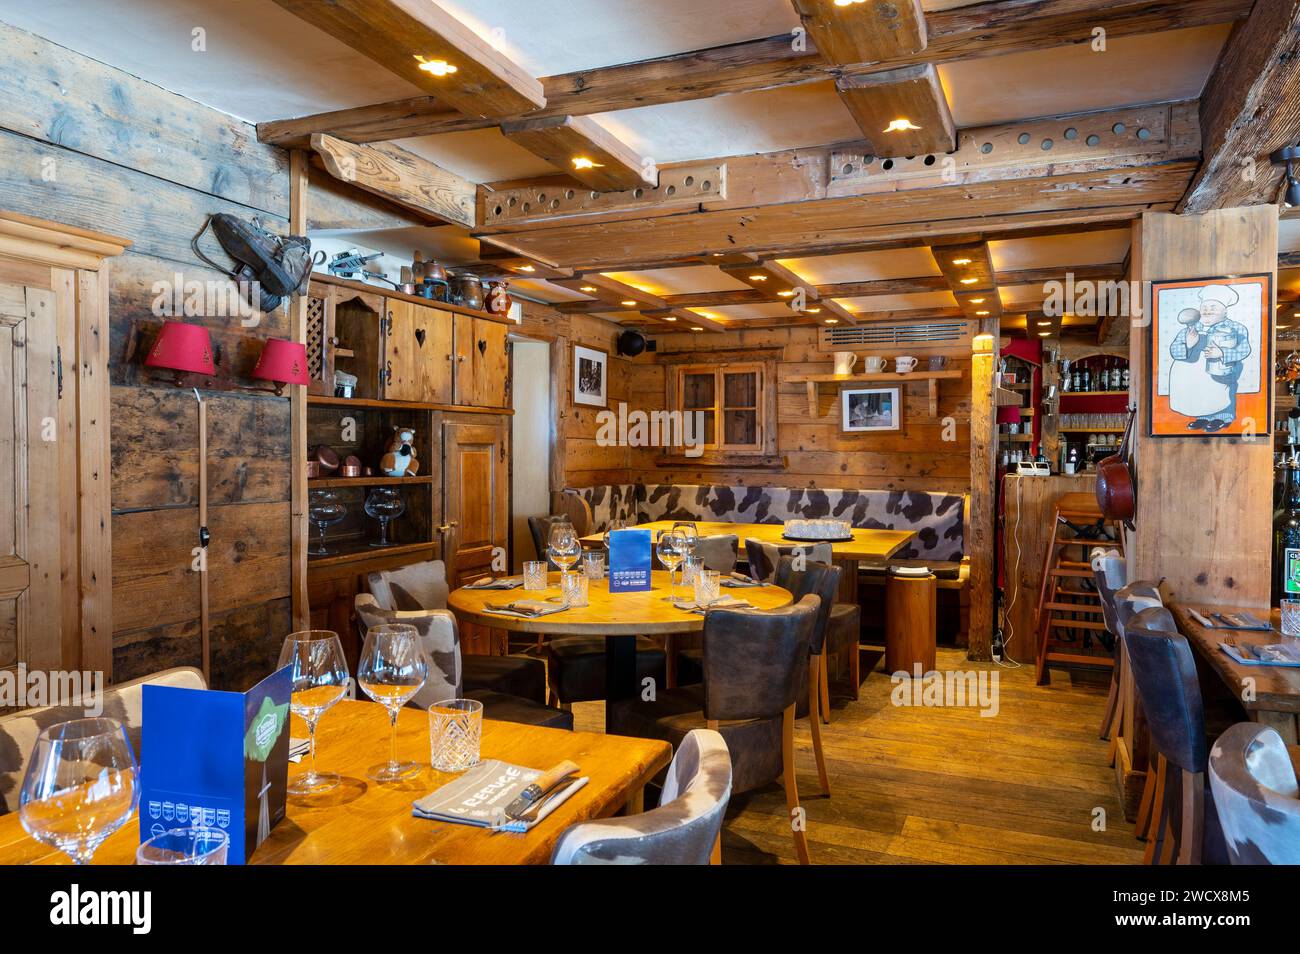 France, Haute Savoie, Megeve, restaurant Le Refuge, very cozy interior of the dining room Stock Photo